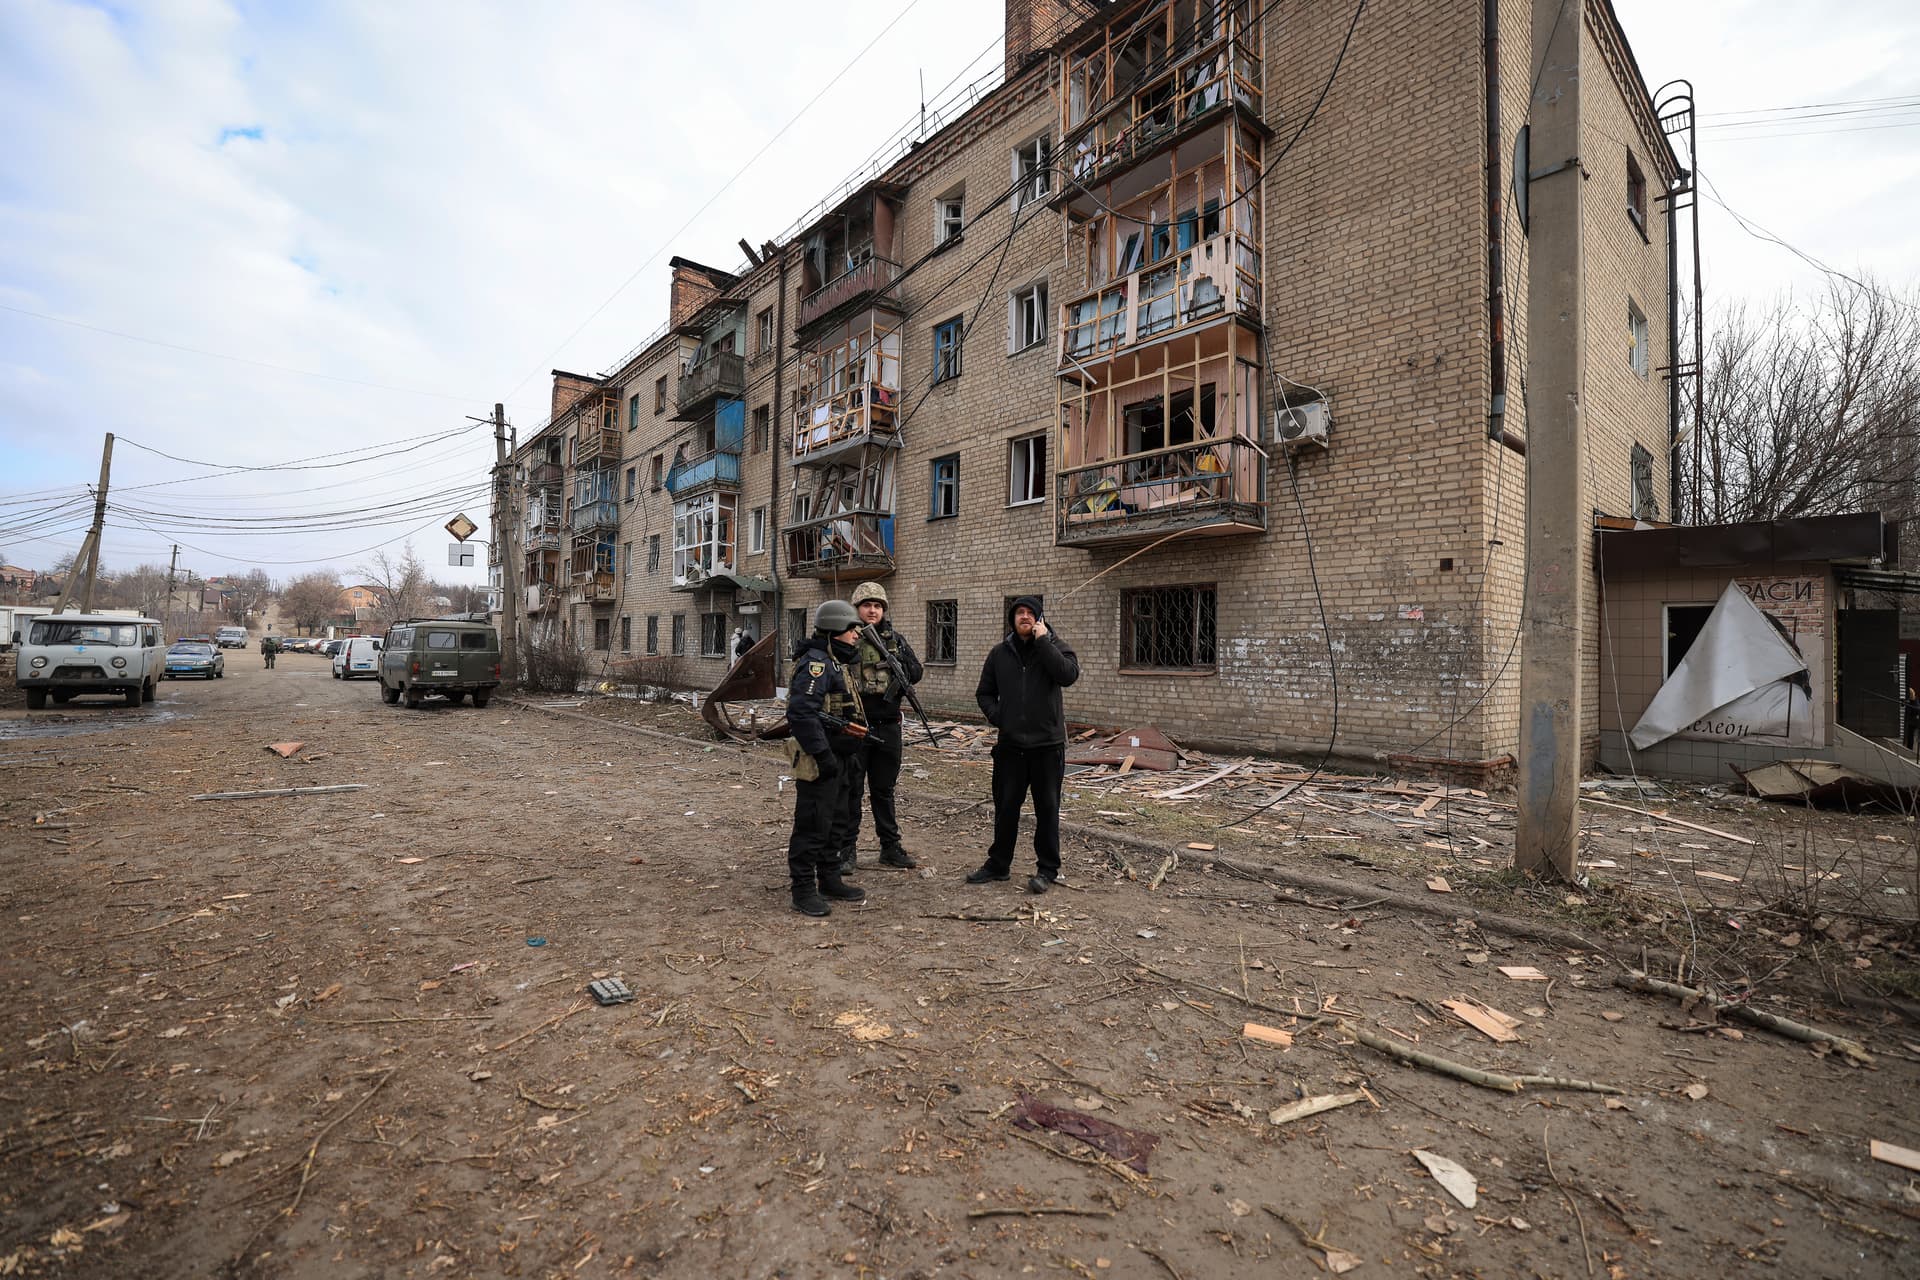 Ukrainian police officers stand in front of a house which was damaged after a Russian attack in Kostiantynivka